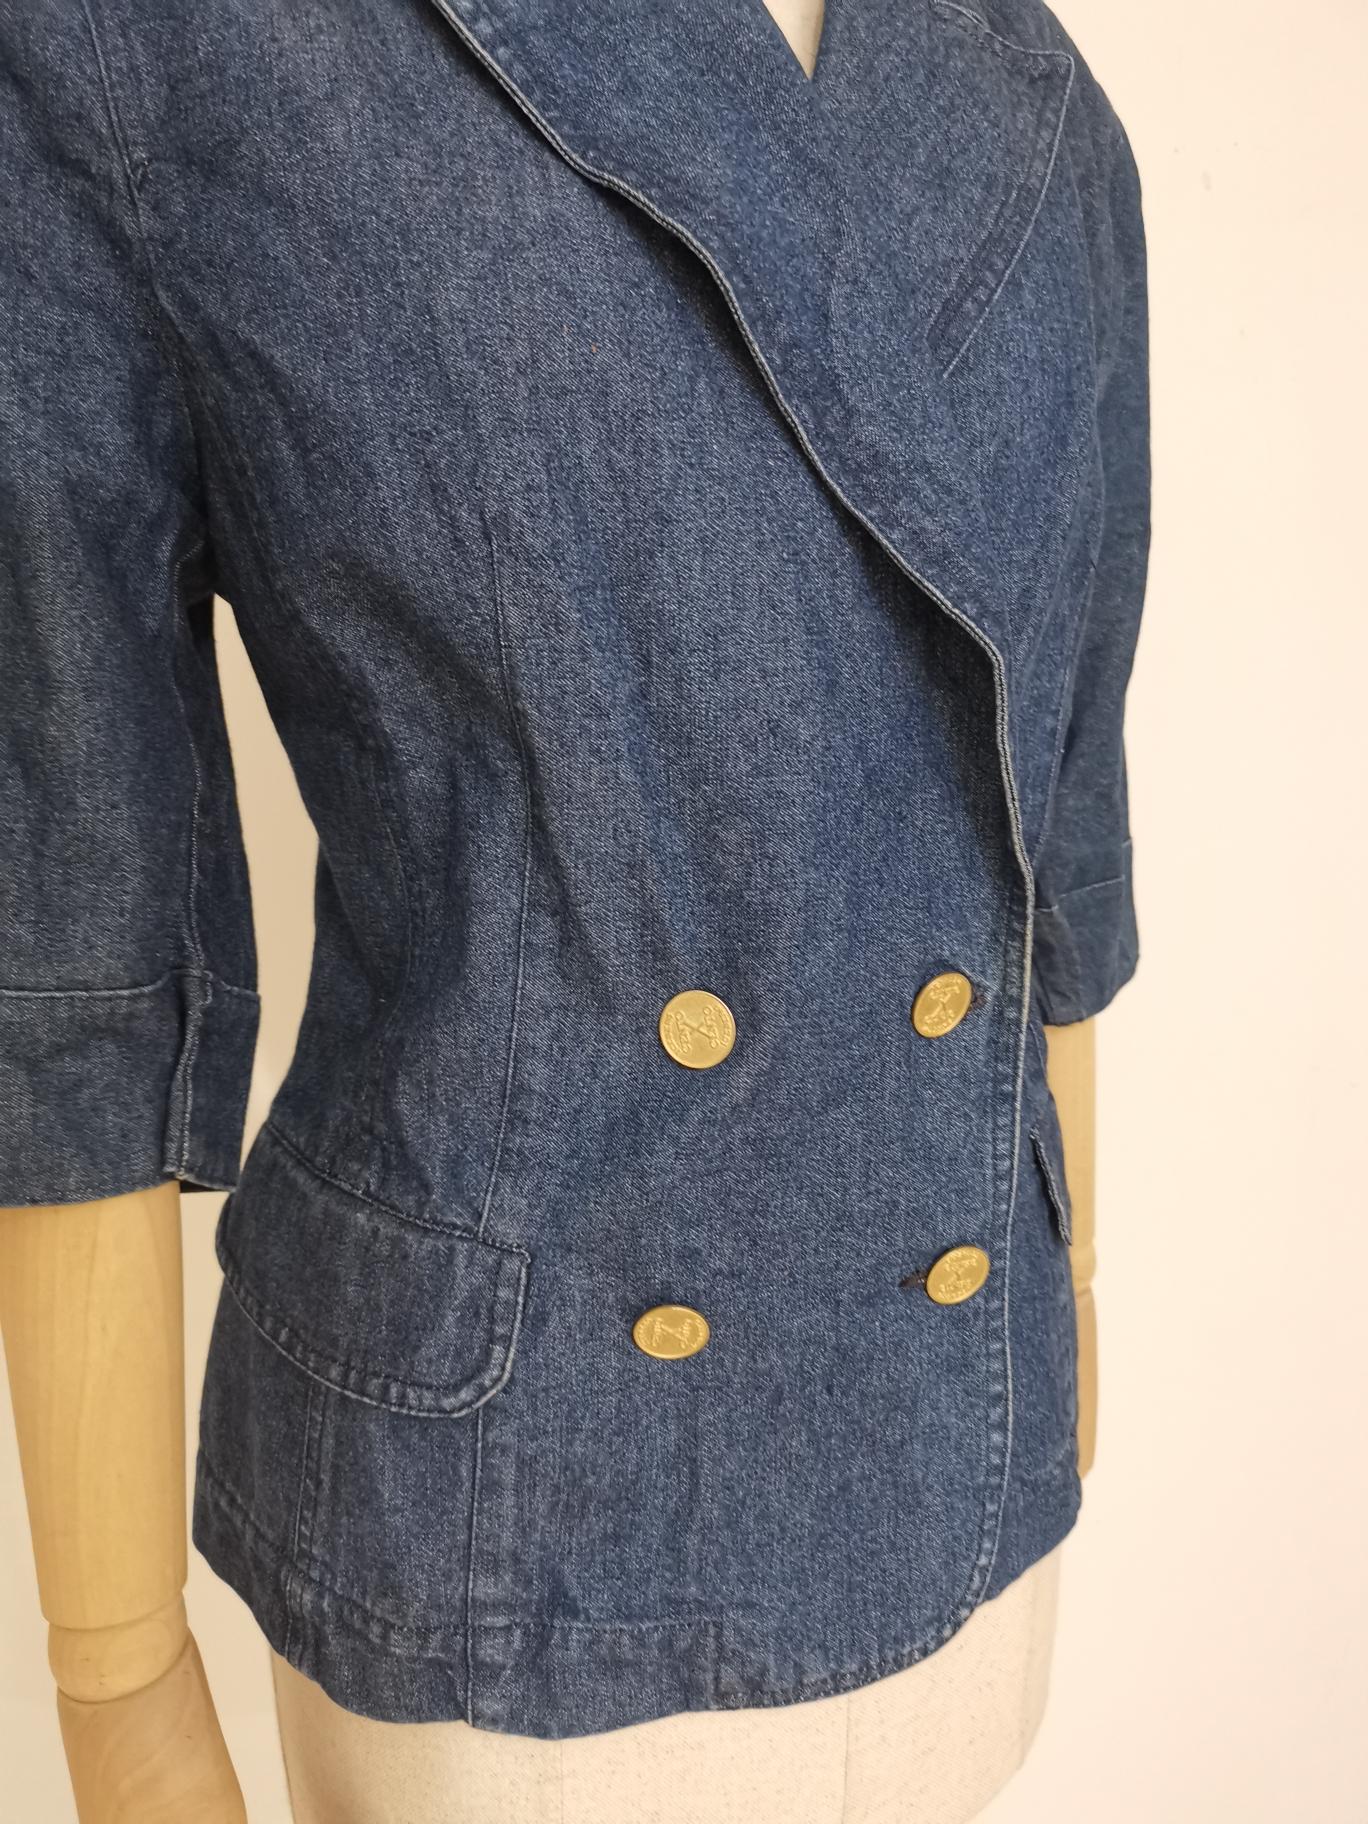 CentoxCento Iceberg denim jacket
size 48 it
totally made in italy
total lenght 66 cm
shoulder to hem 38 cm